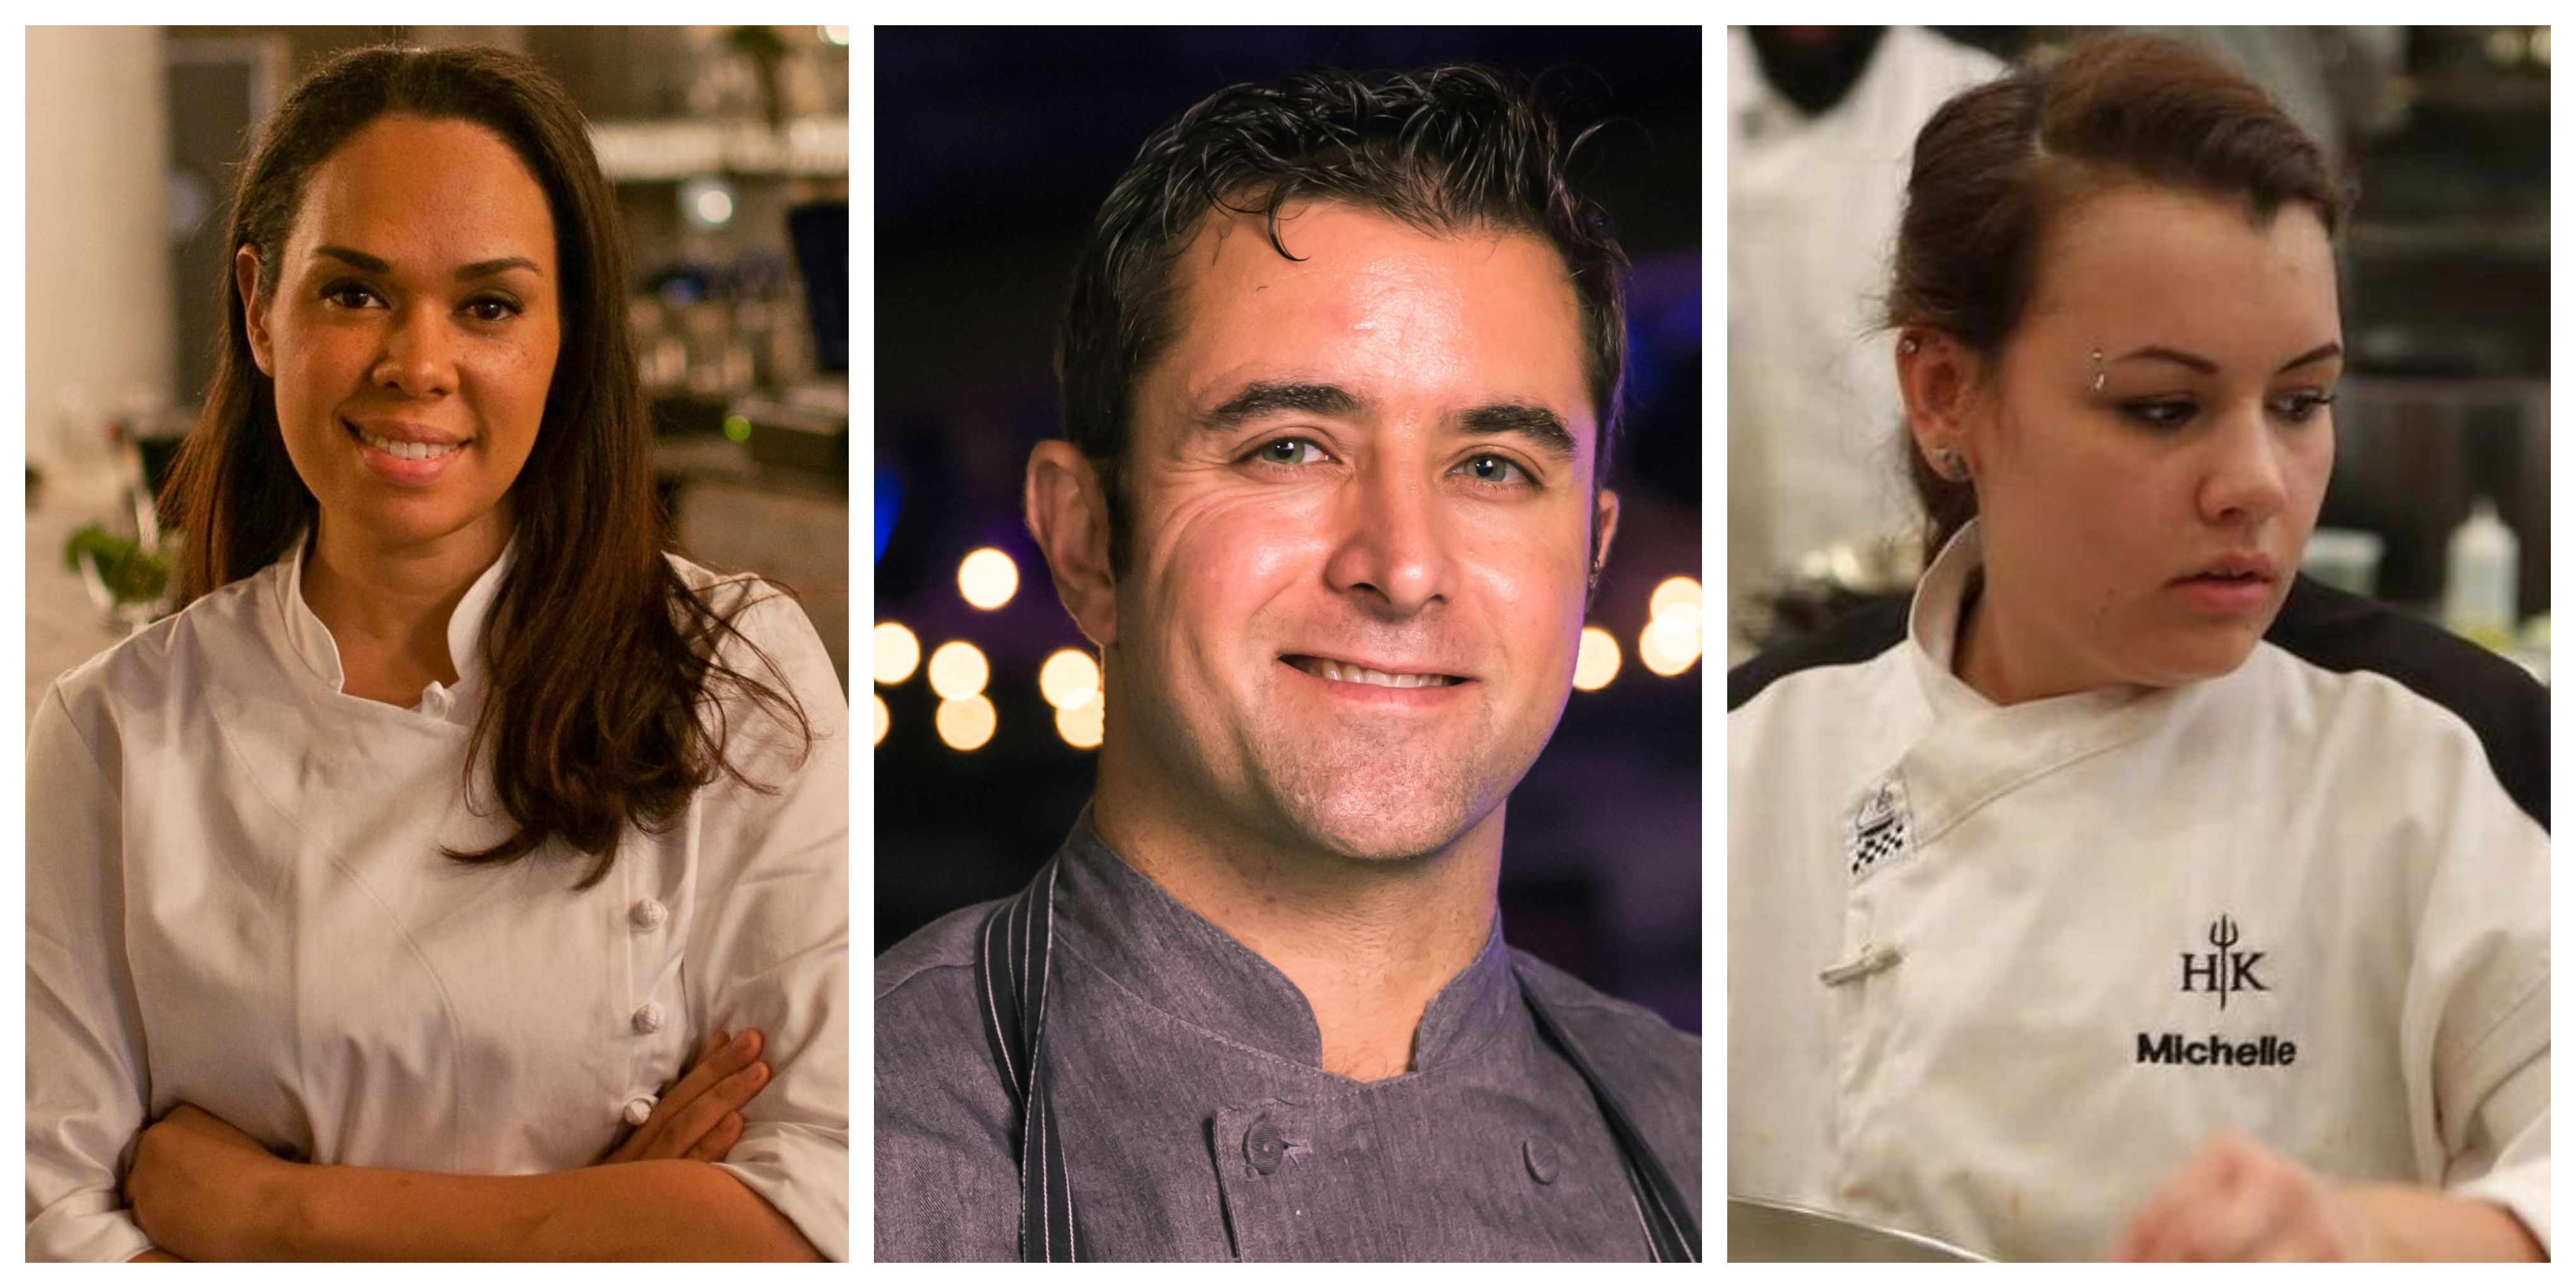 Hells Kitchen The 10 Best Chefs Ranked By Skill Level 